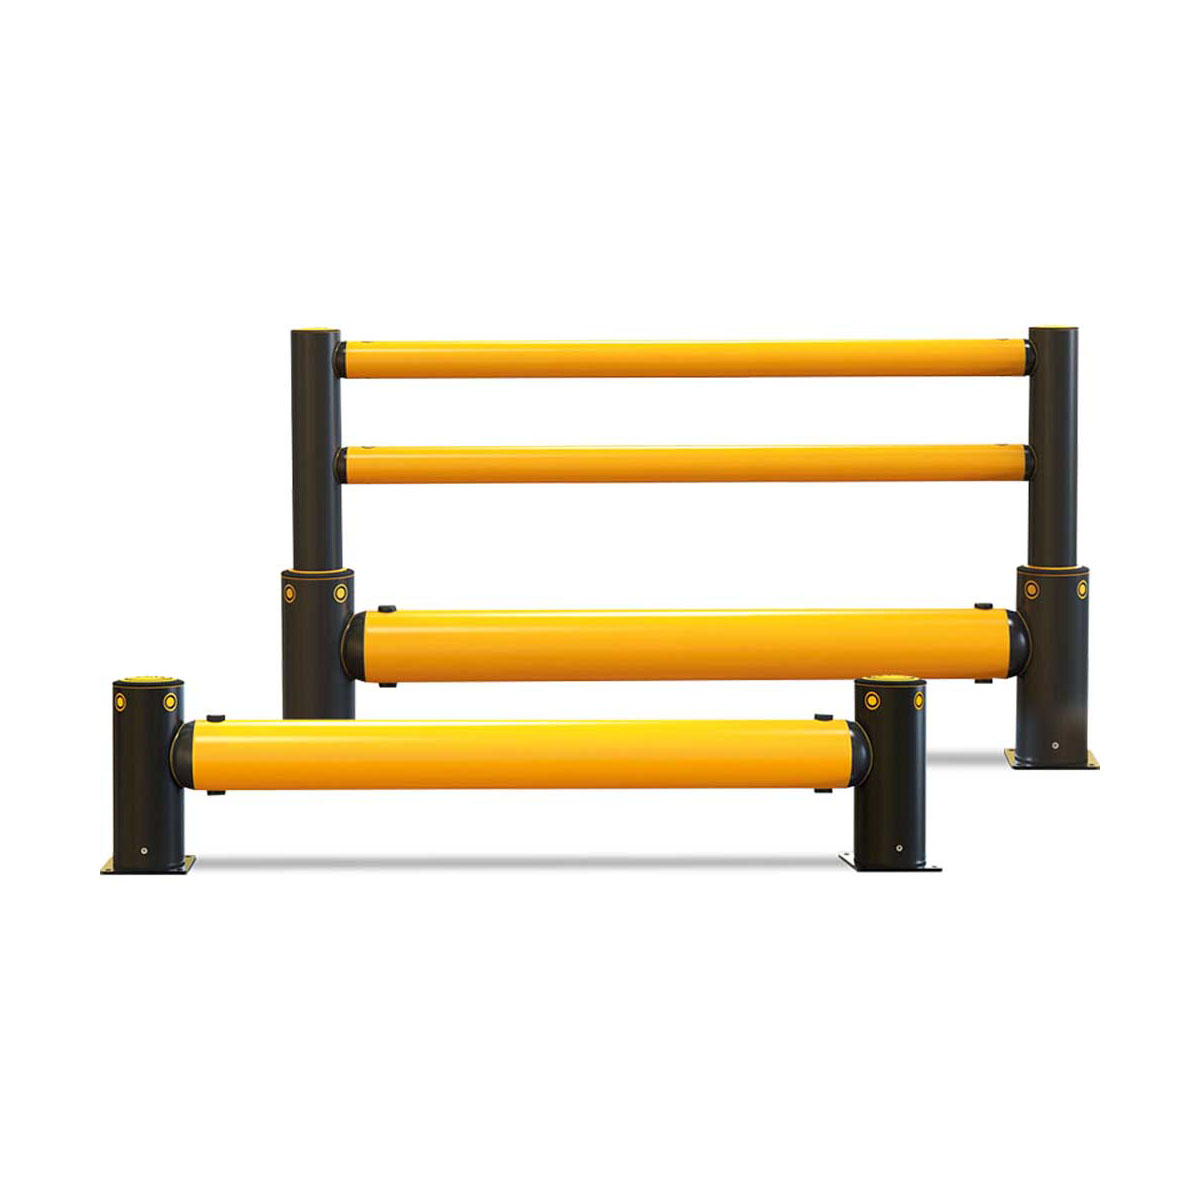 Buy Traffic Barrier - A-Safe (Flexible Plastic) available at Astrolift NZ